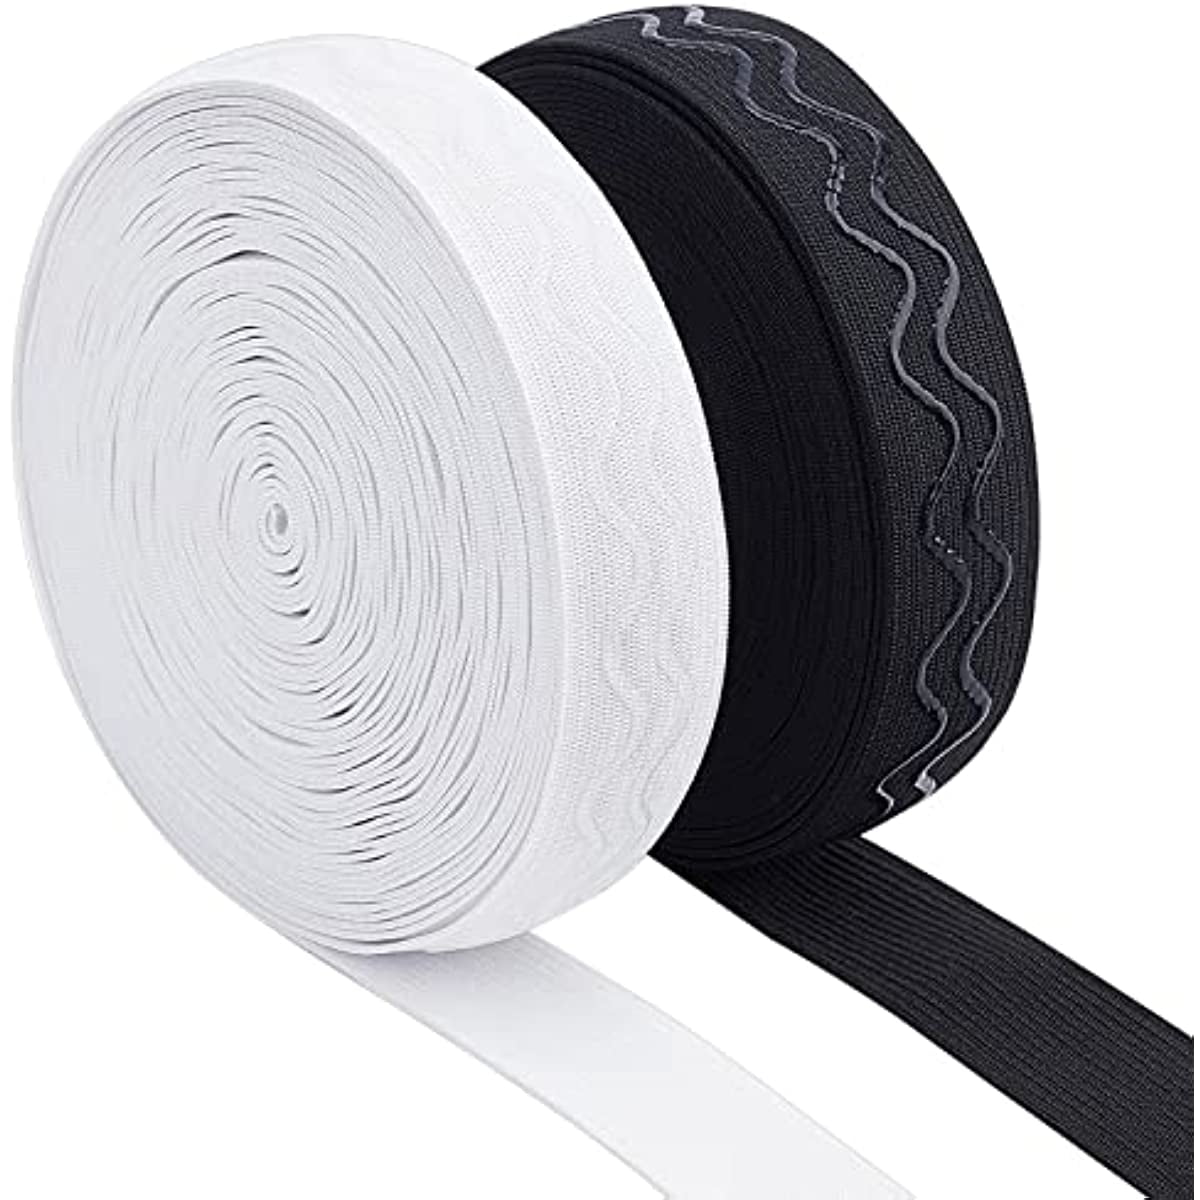 16 Yards Non-Slip Gripper Band 1.5” Elastic Silicone Band 3-Strip Non-Slip  Elastic Ribbon Black White Elastic Polyester Sewing Webbing Band for